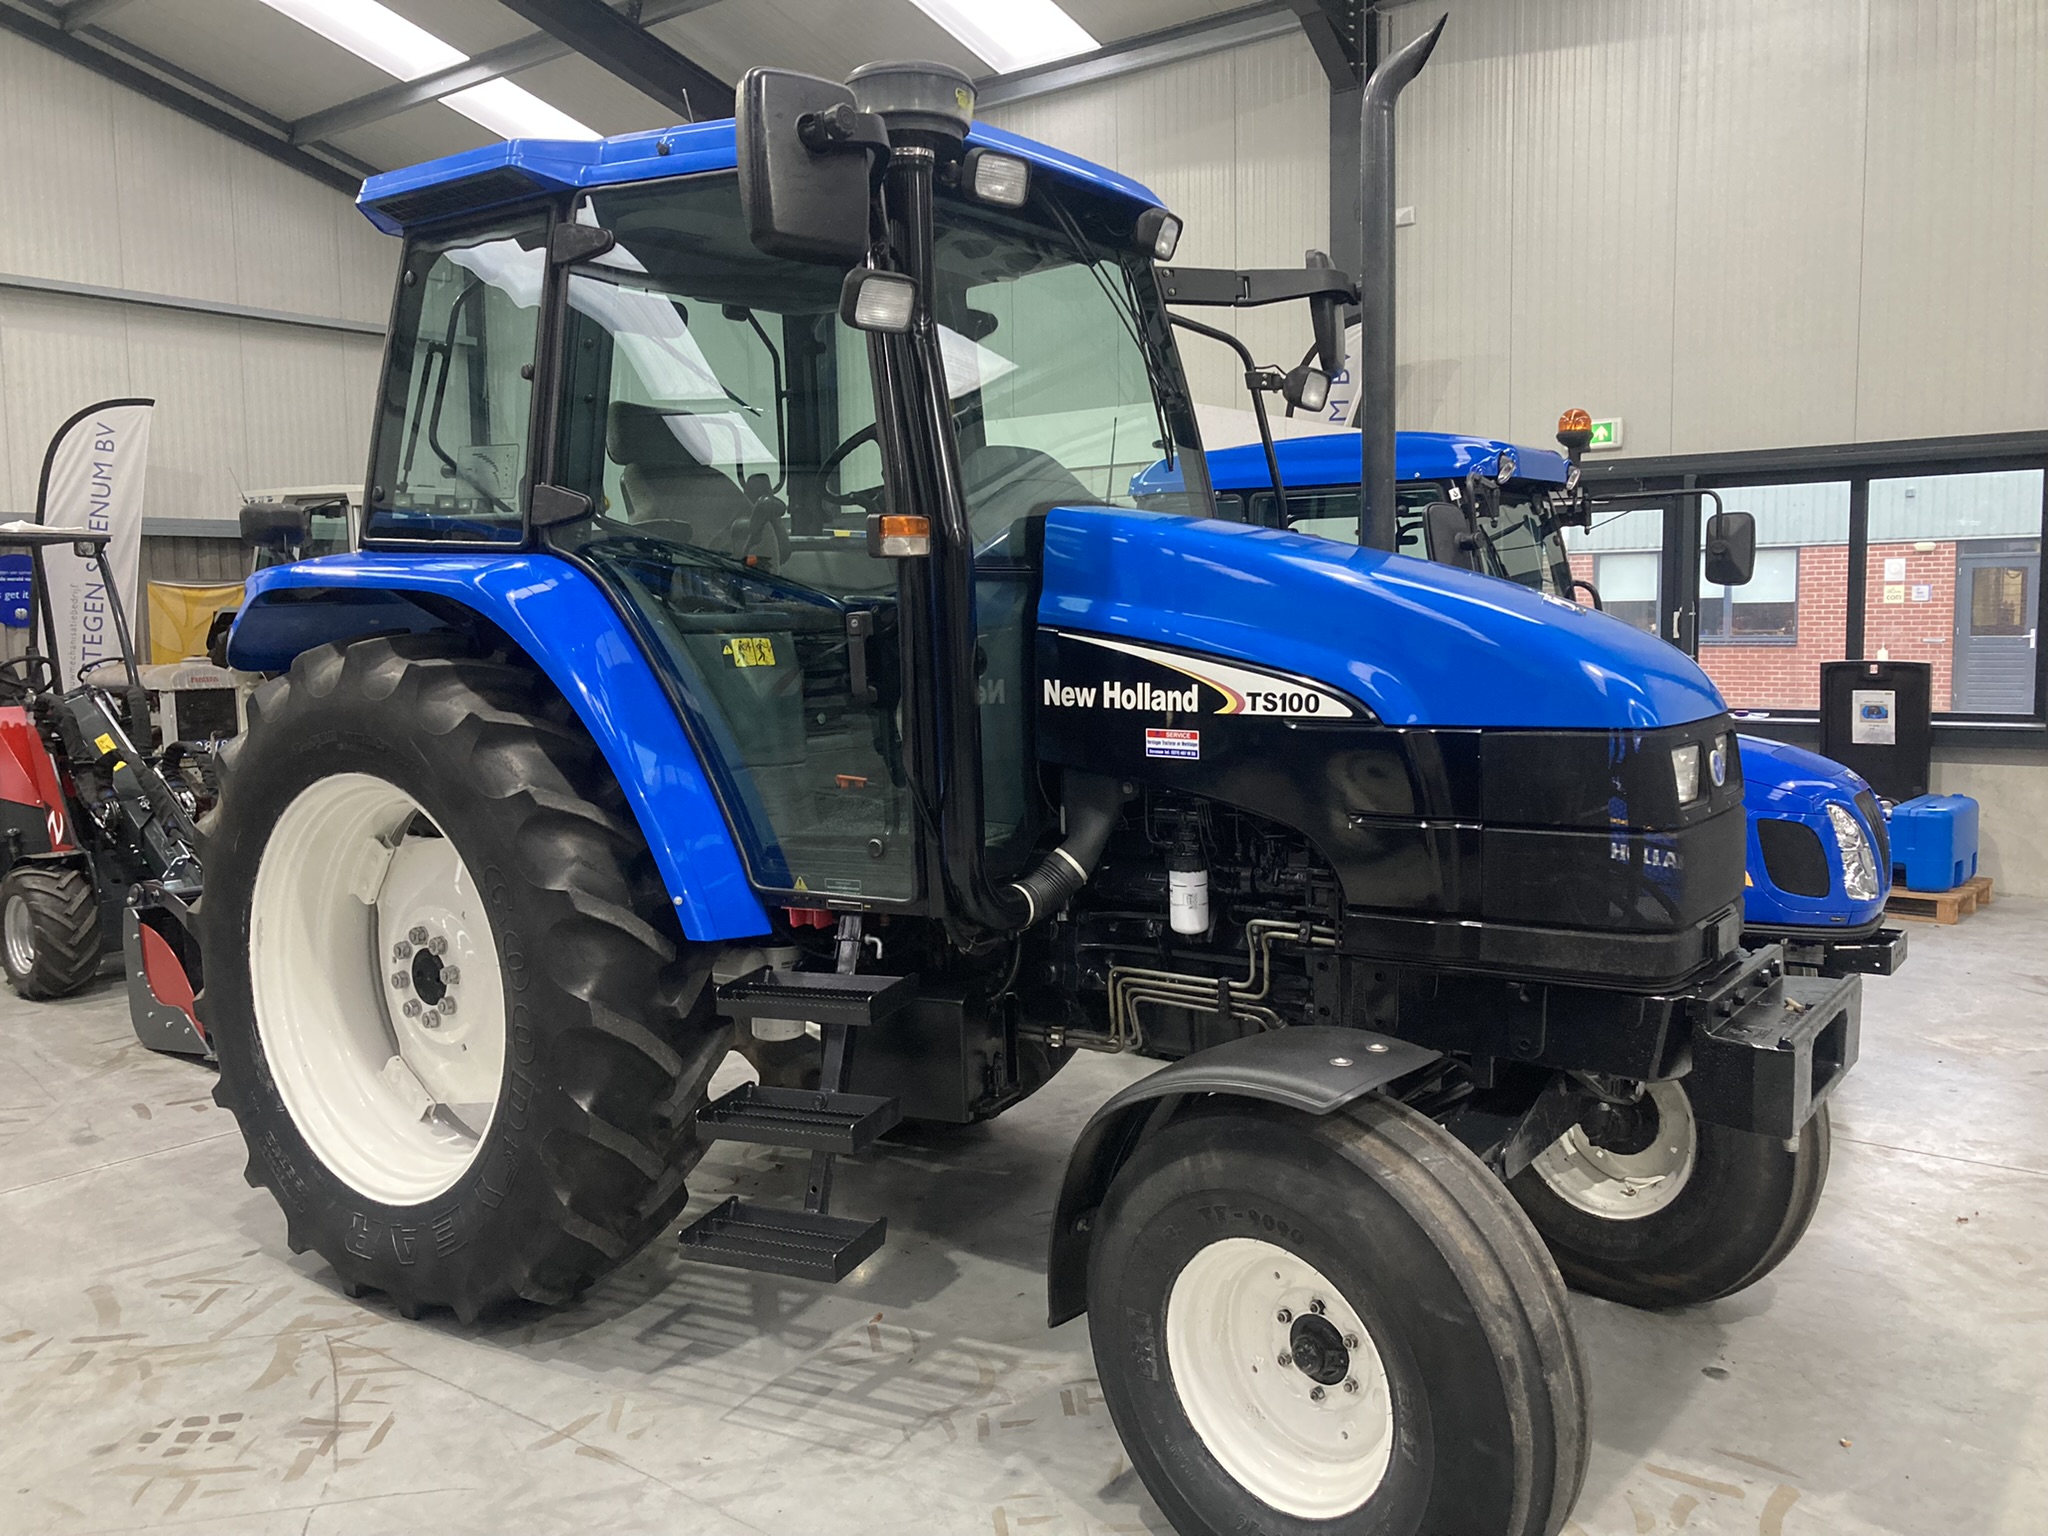 Aflevering 2022: <br/> New Holland TS100